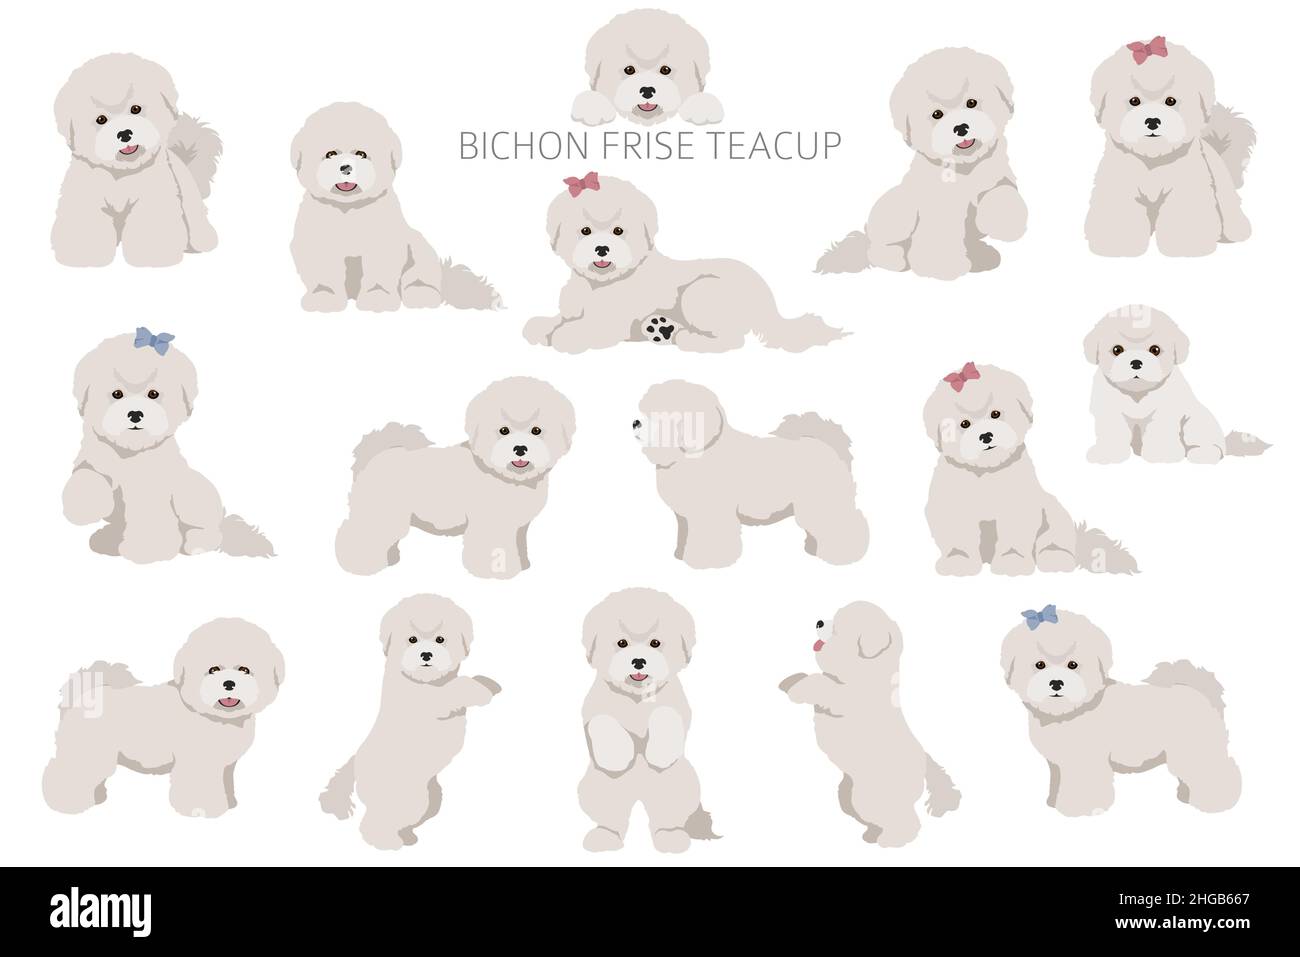 Bichon frise Teacup clipart. Different coat colors and poses set.  Vector illustration Stock Vector